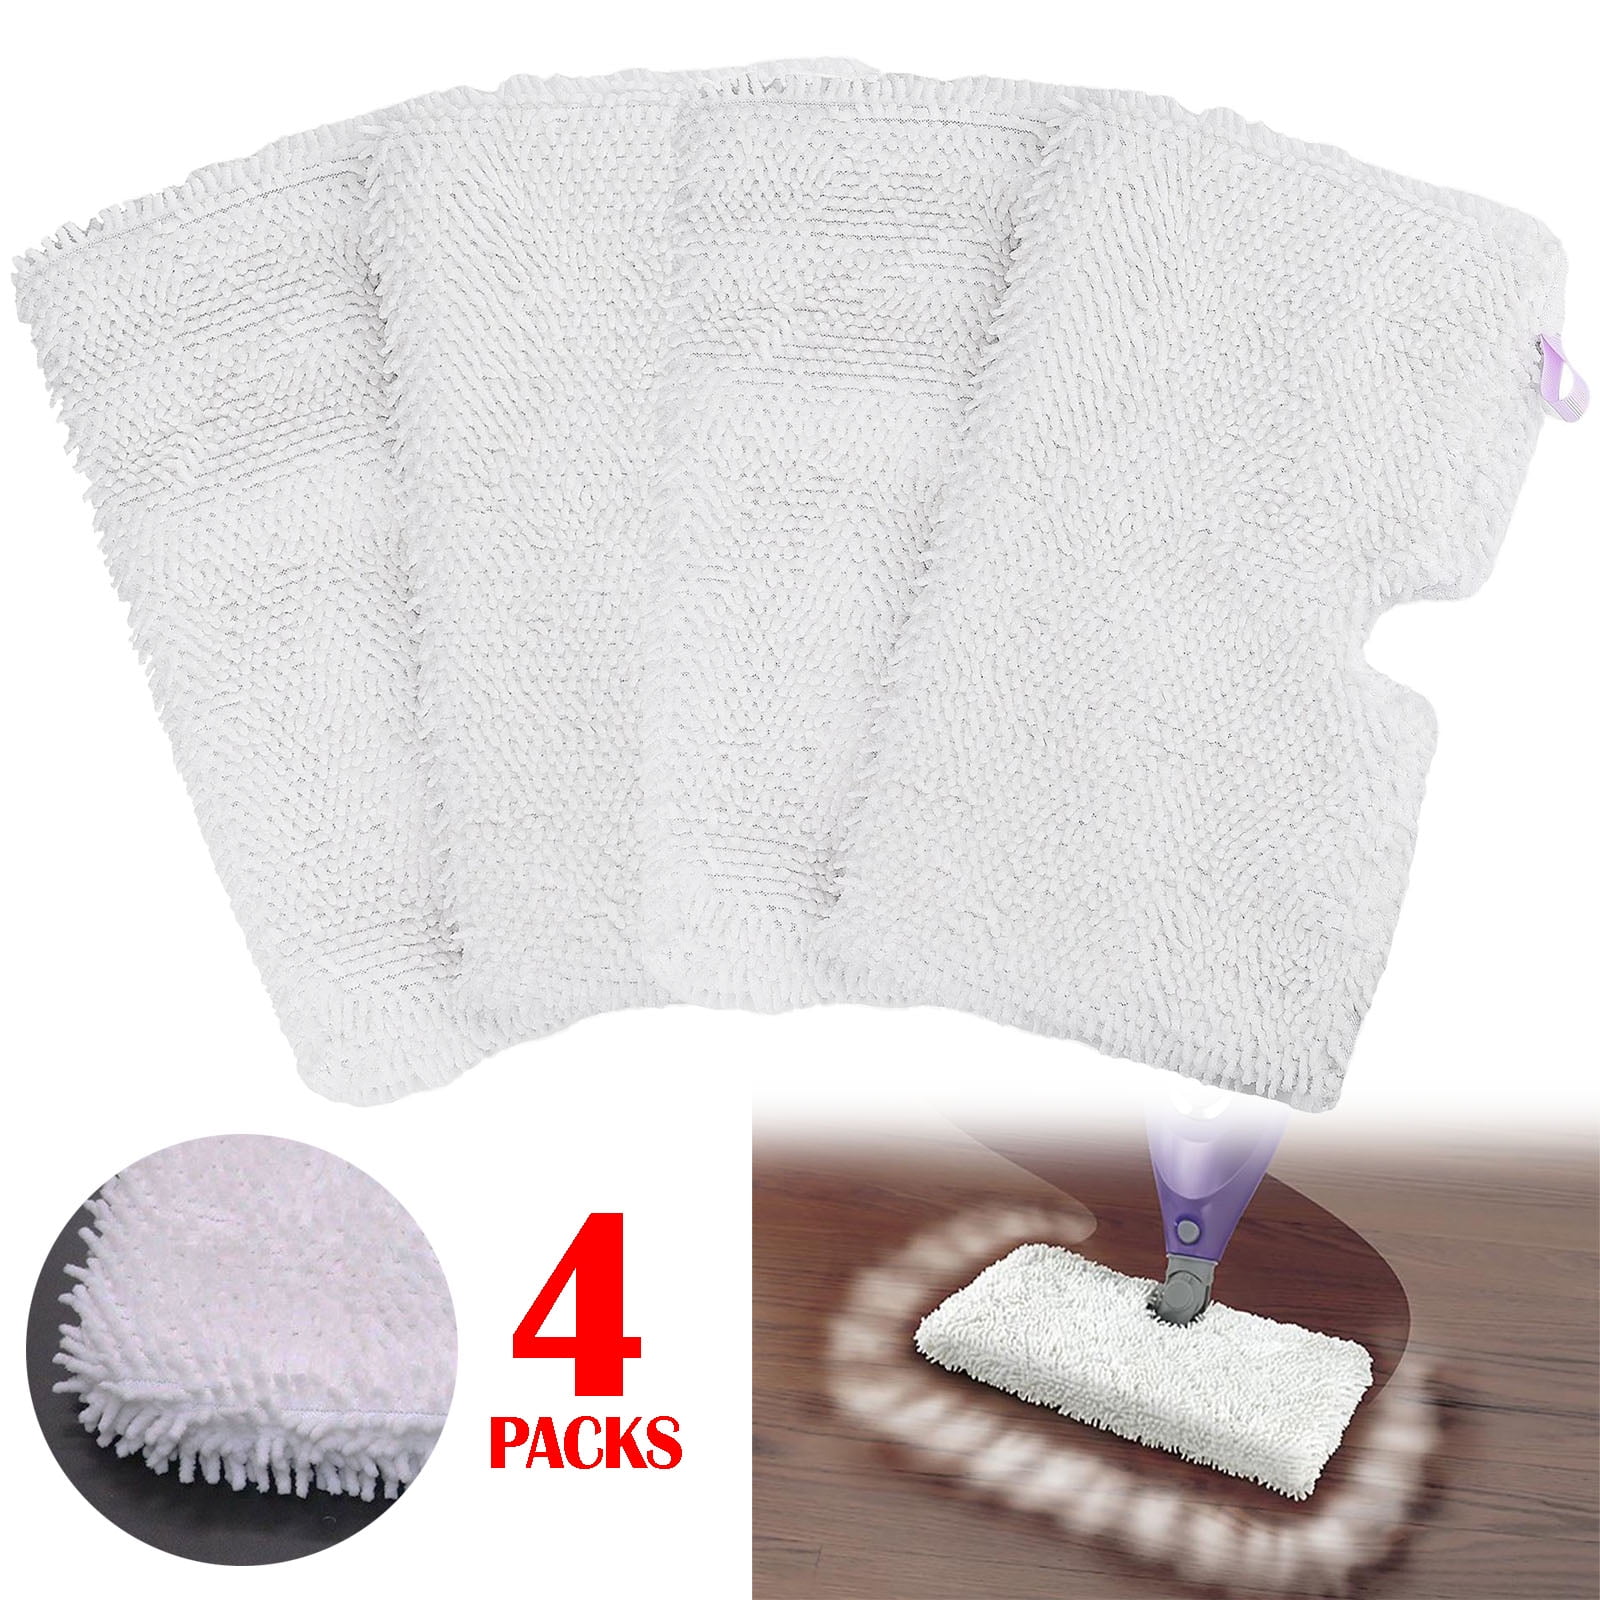 S3901 S3601 S3501 S3550 Shark Euro Pro Steam Mop Pads Replacement S3101 S3250 